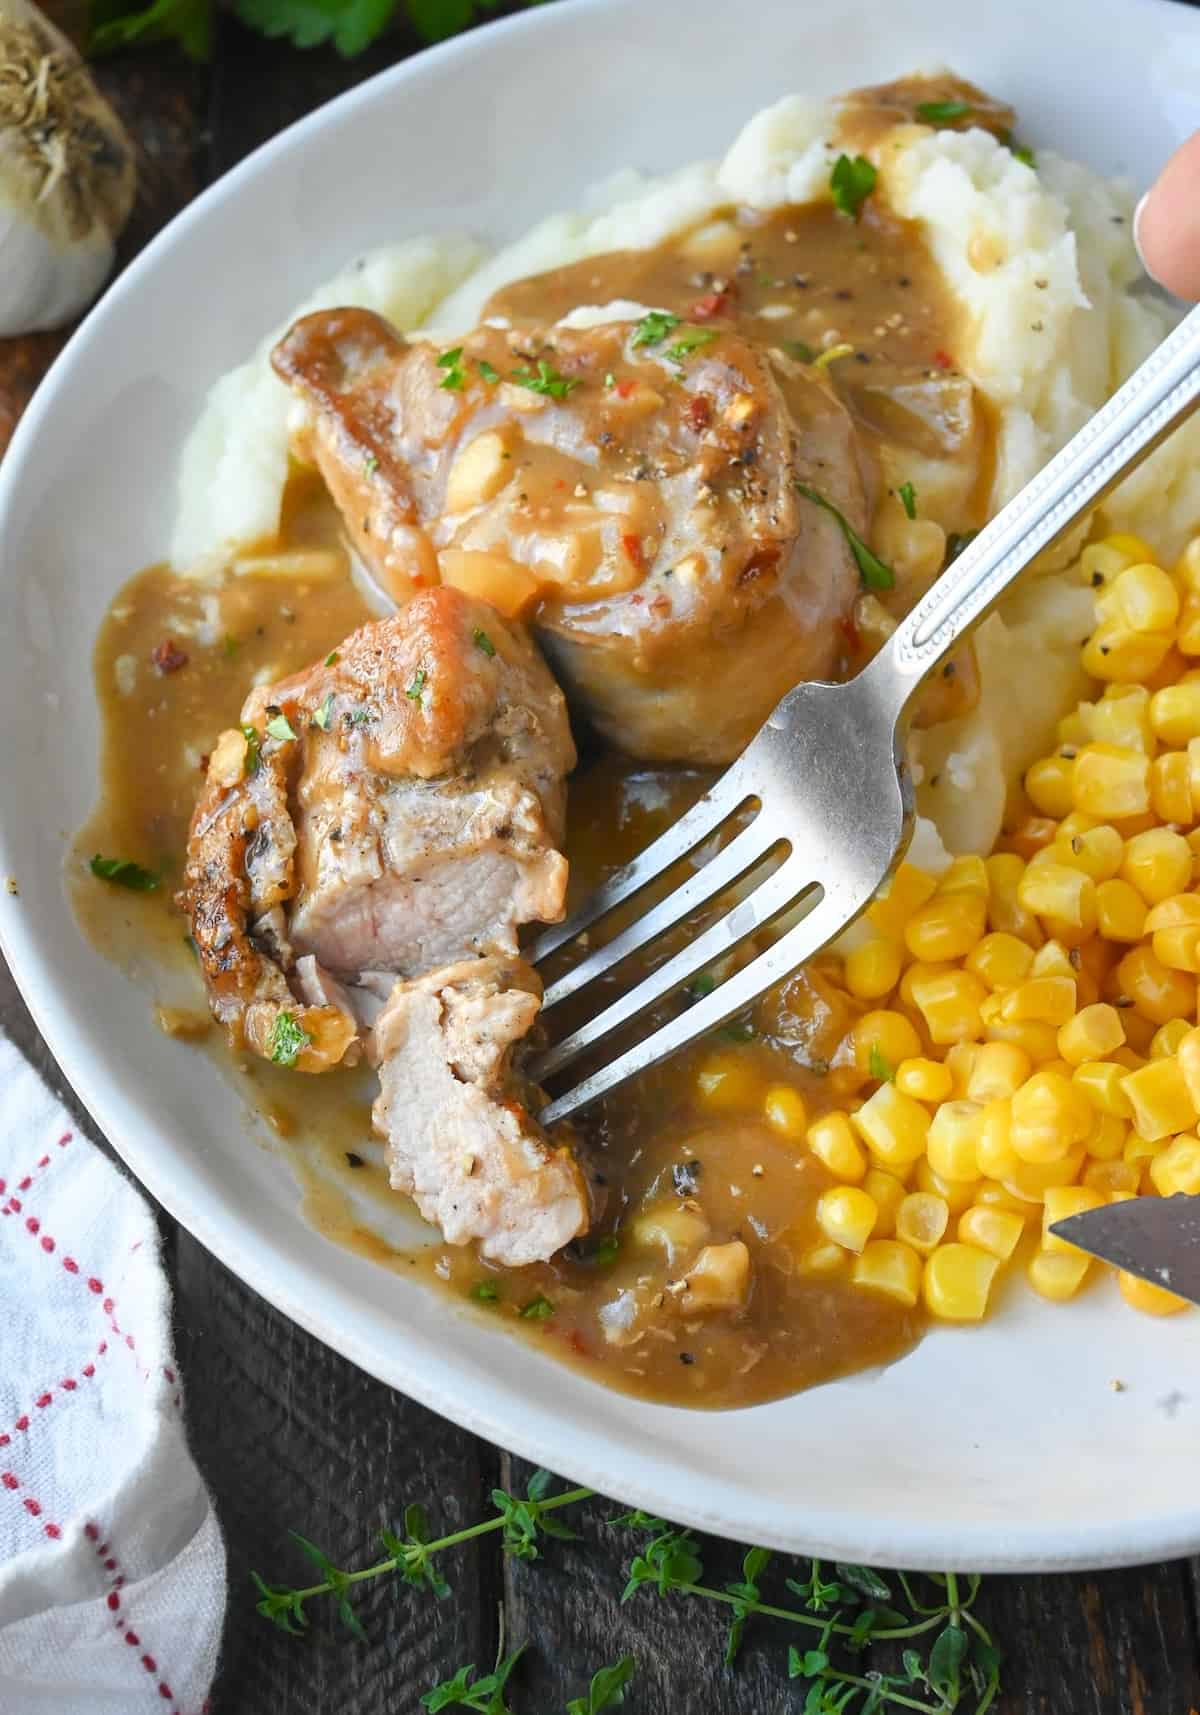 Vertical image of a form grabbing a bite of pork medallions with gravy.